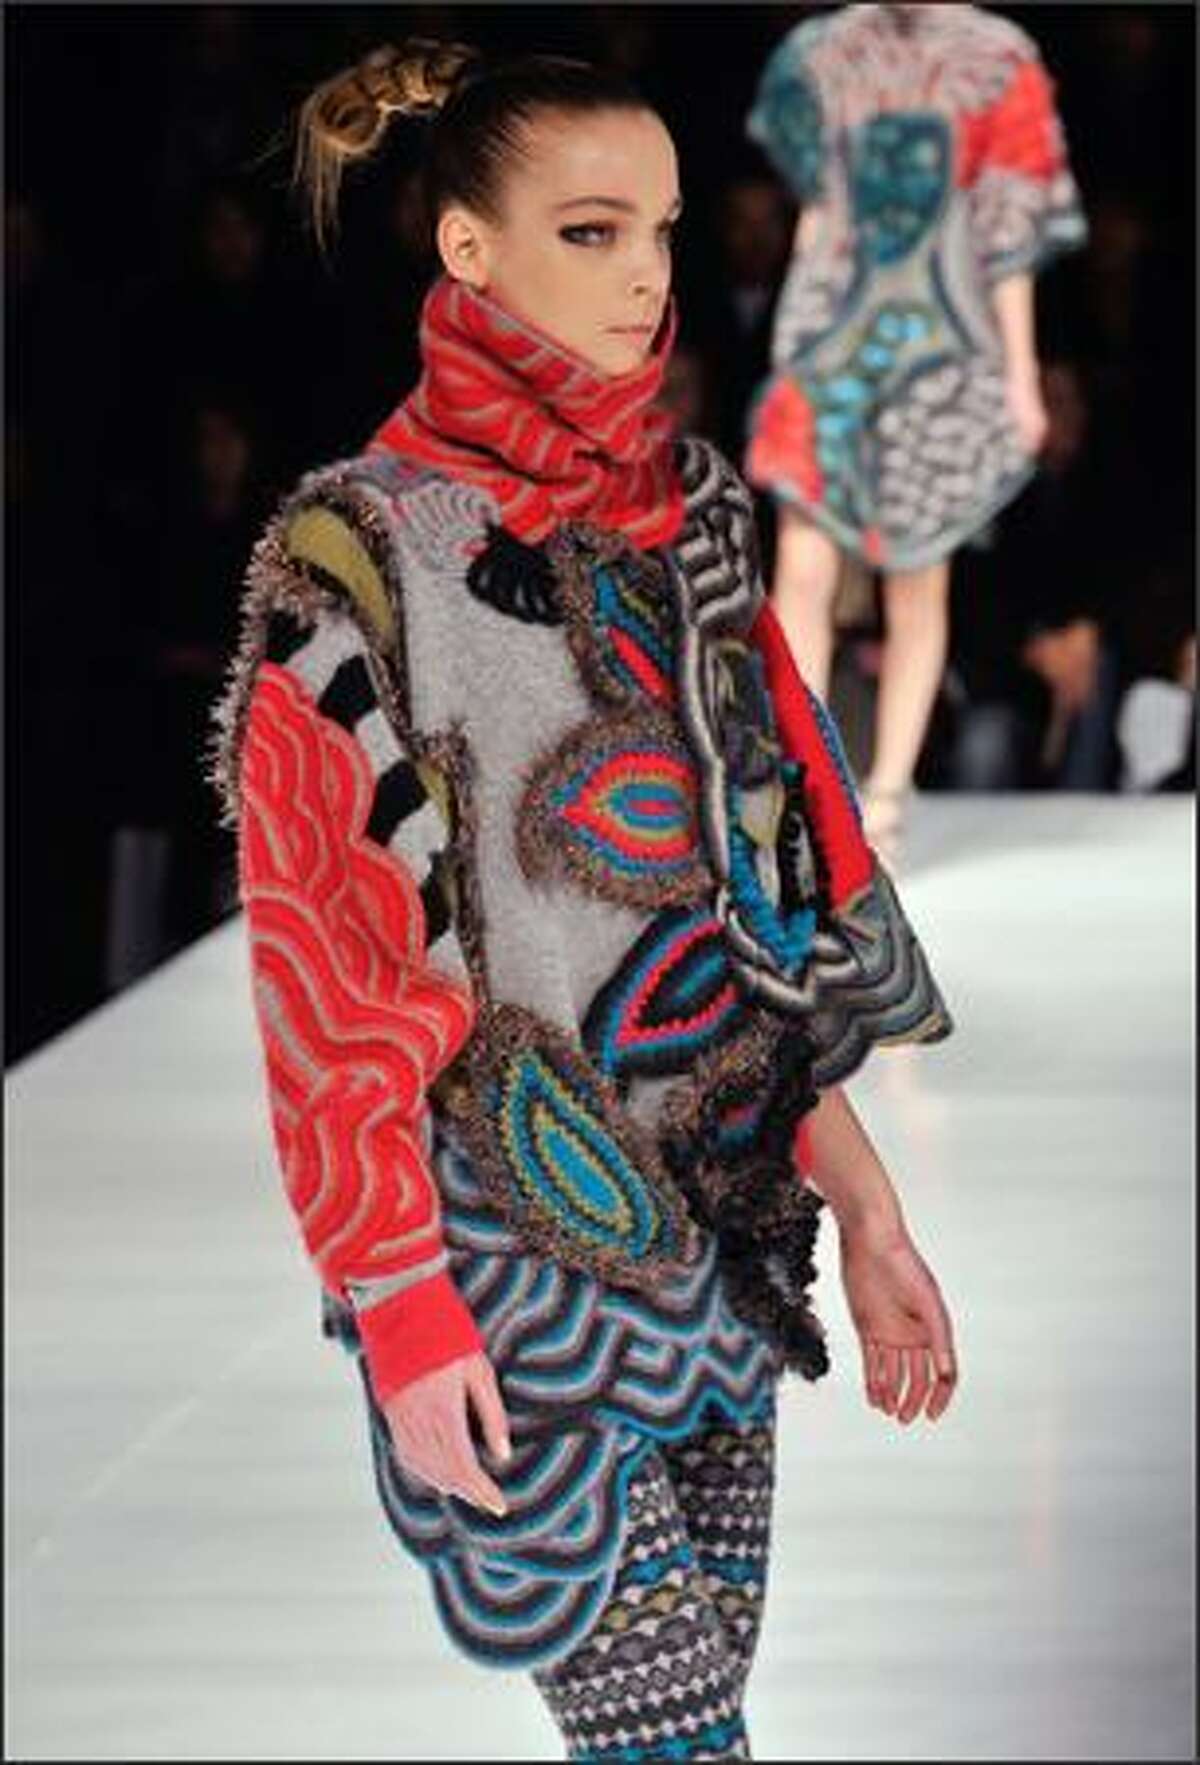 A model presents a creation by Italian designer Antonio Marras for Kenzo during the autumn/winter 2008-2009 ready-to-wear collection show in Paris.